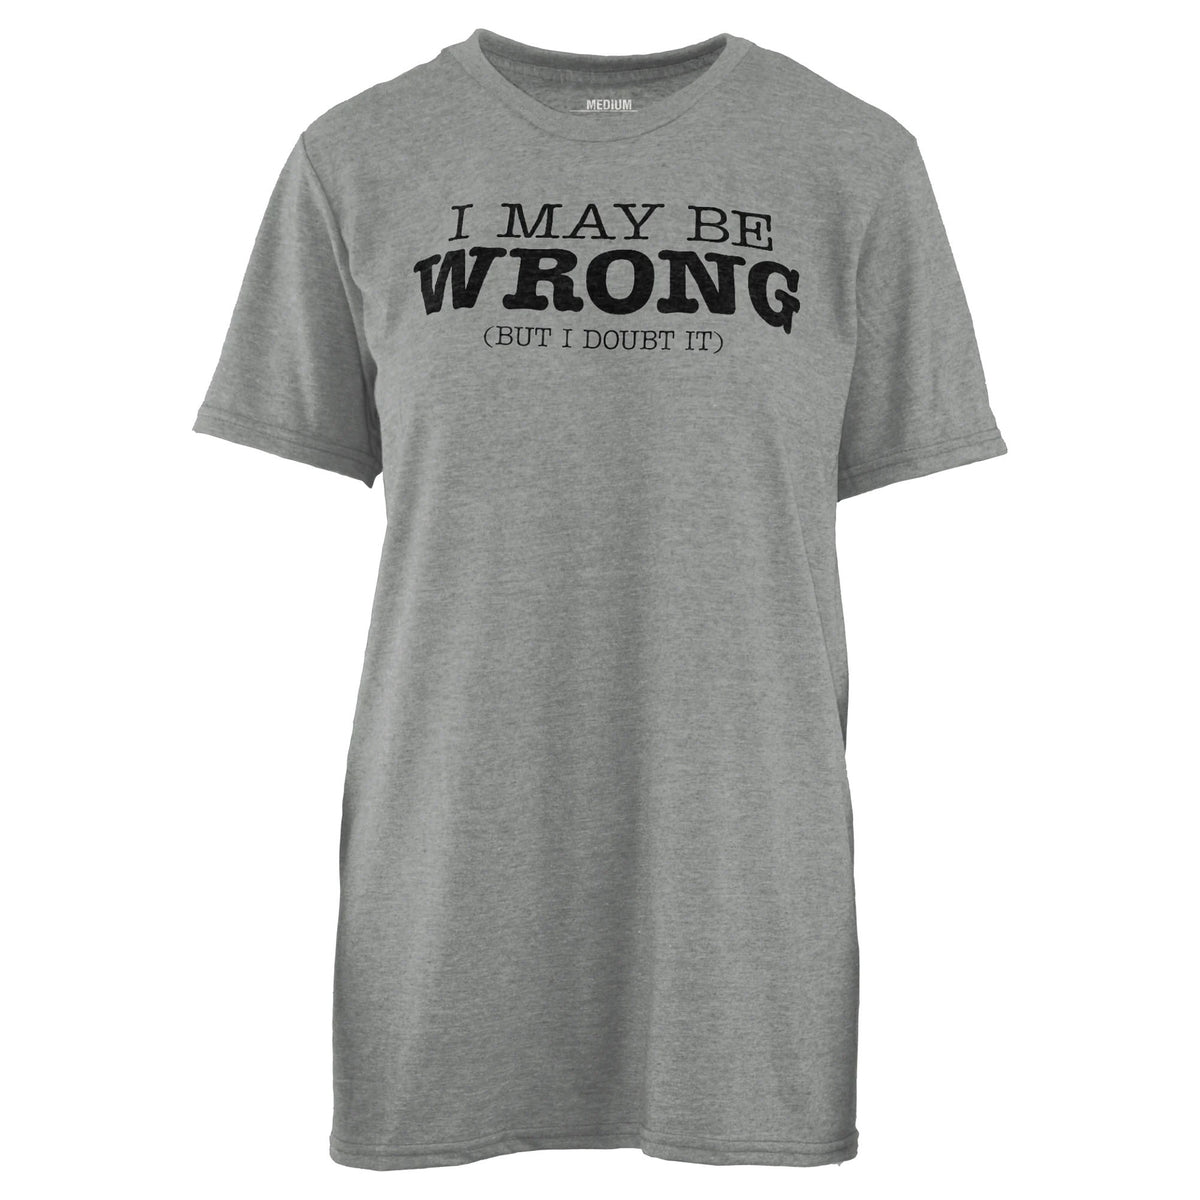 I May Be Wrong Tee But I Doubt It Tee